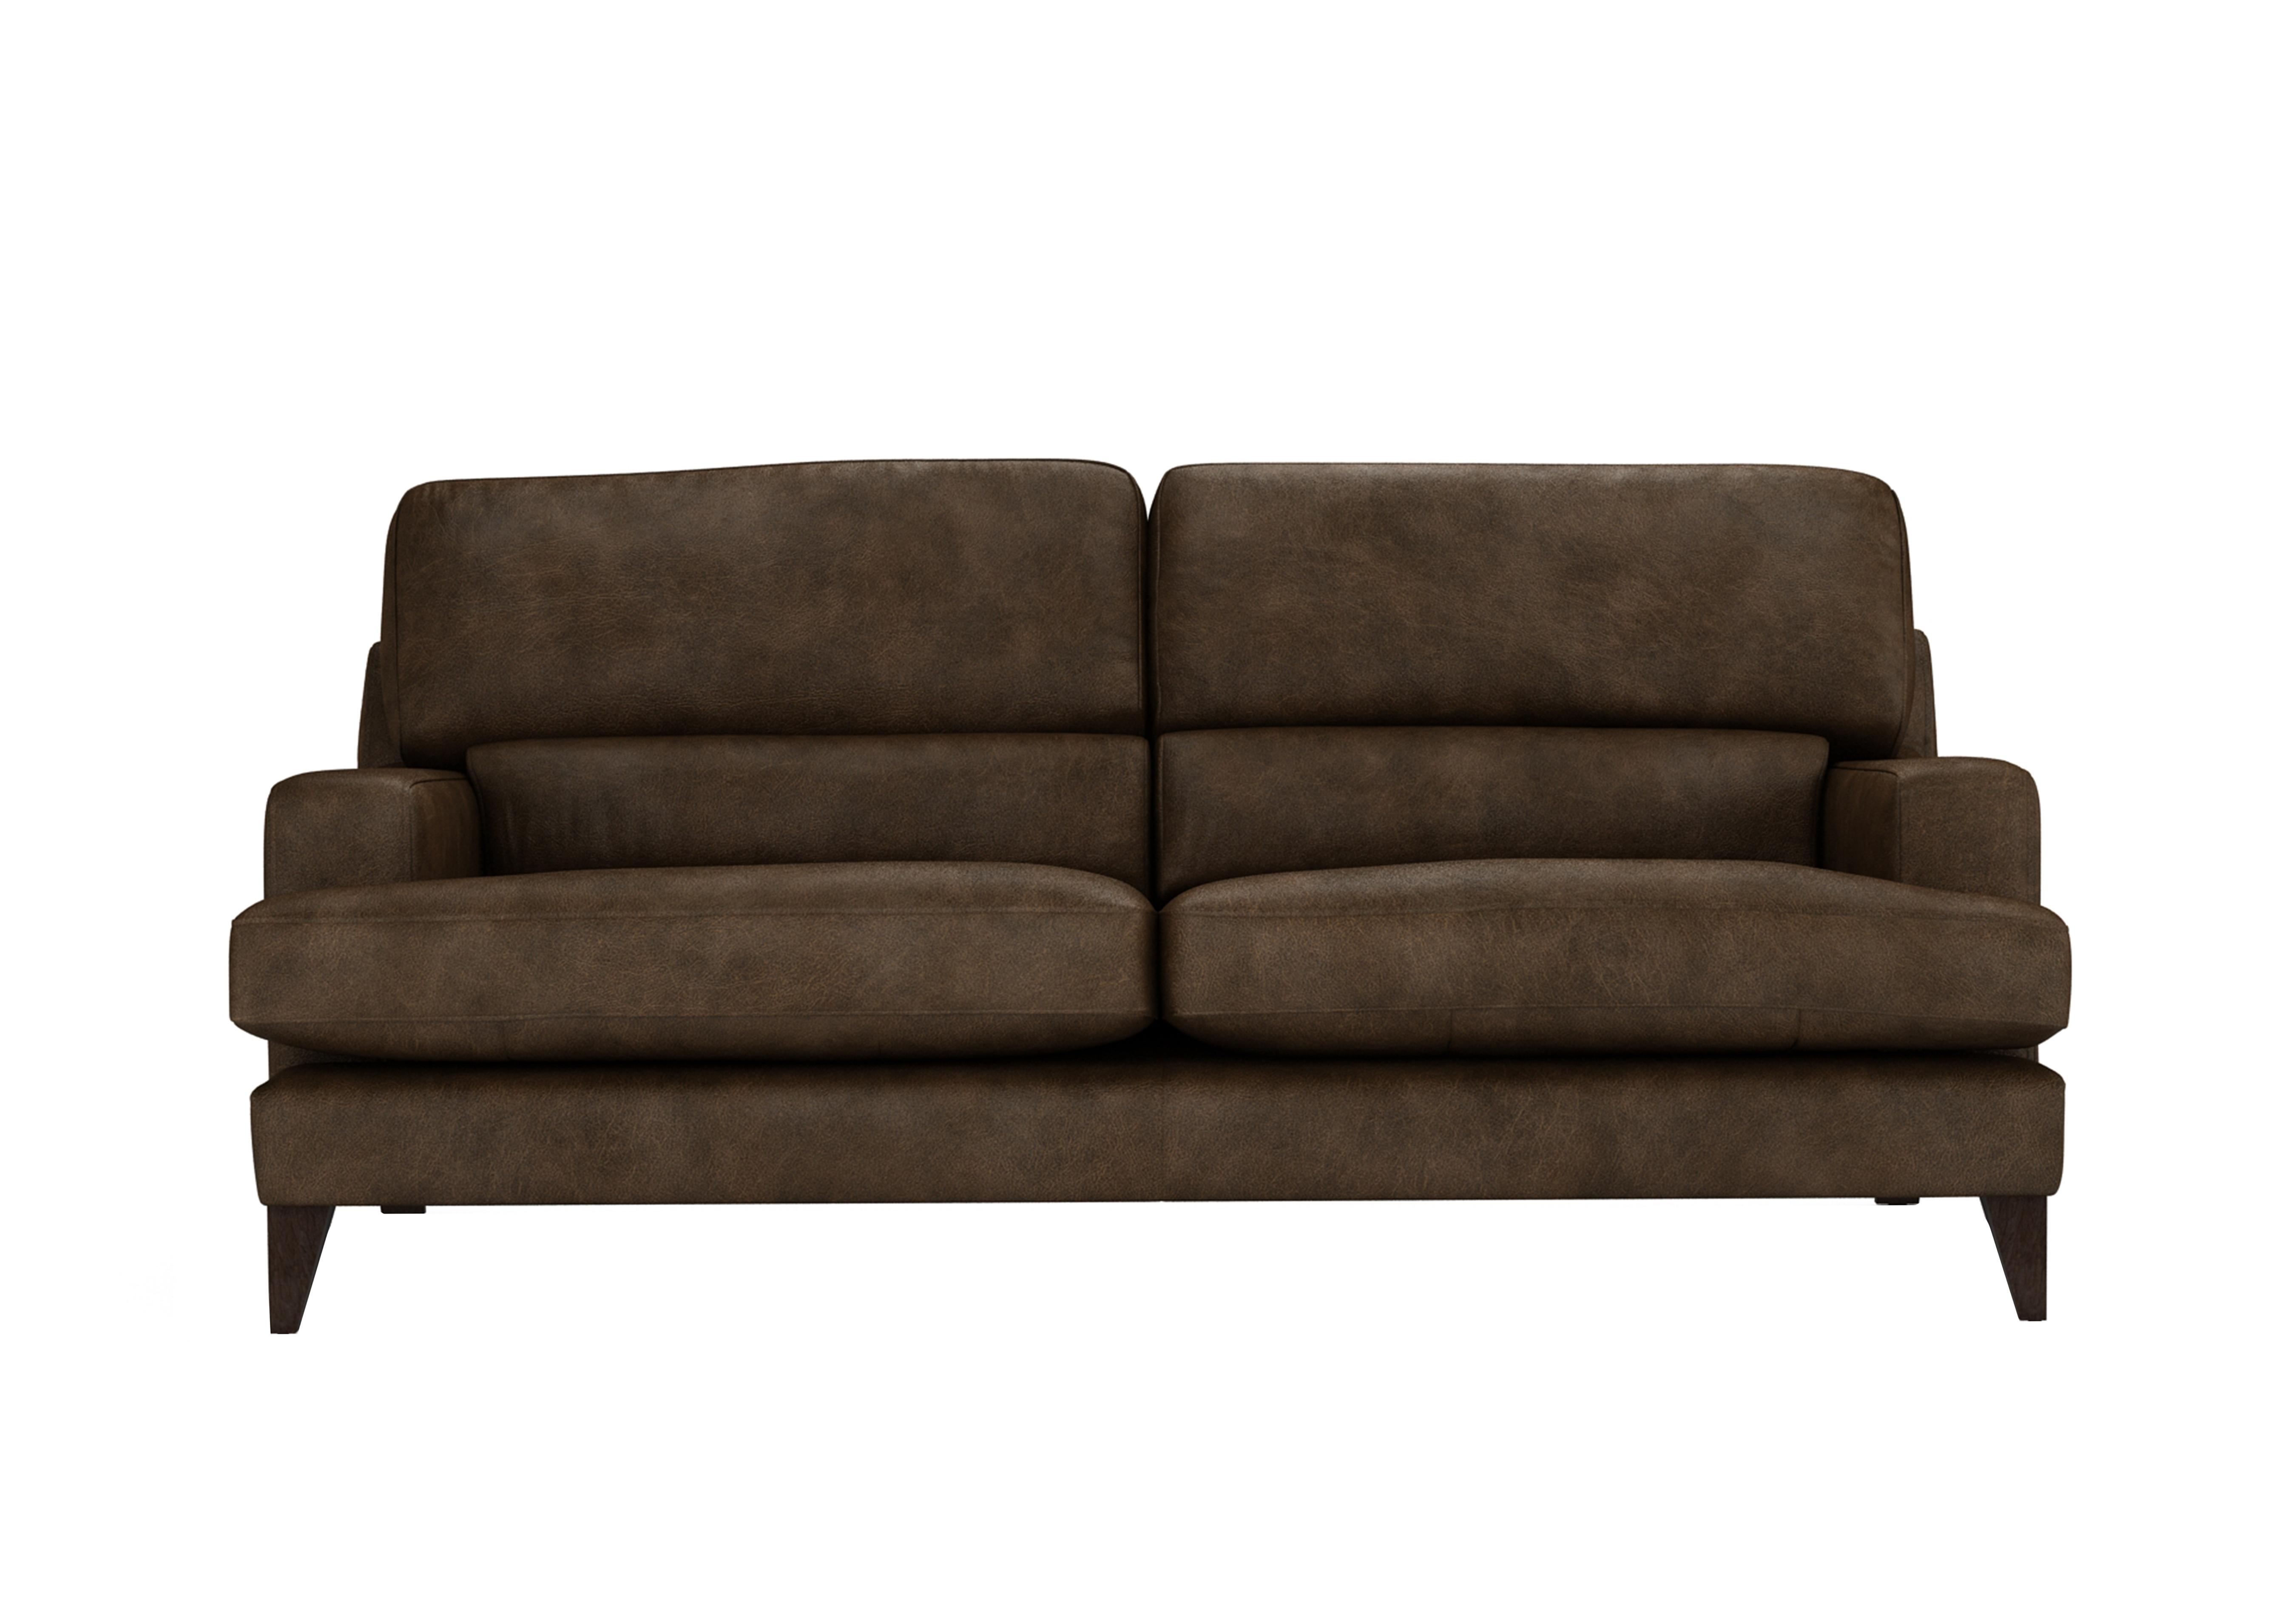 Romilly 3 Seater Leather Sofa in Bou192 Bourbon Wa Ft on Furniture Village